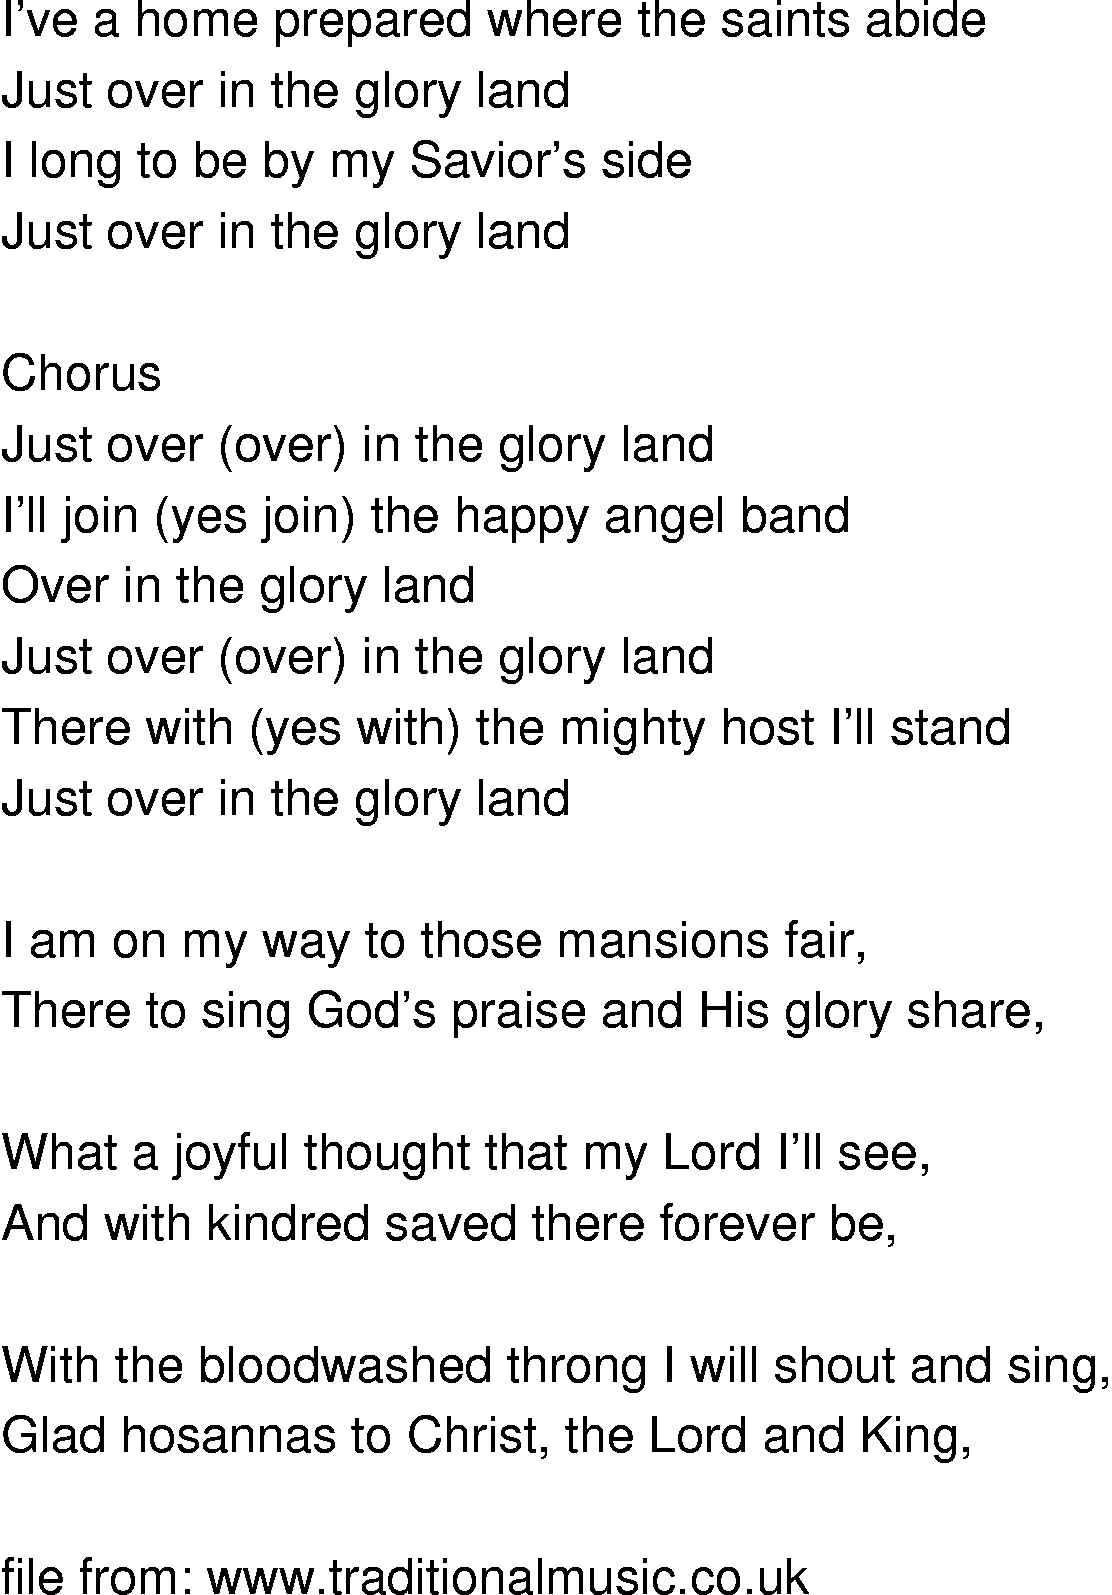 Old-Time (oldtimey) Song Lyrics - just over in the glory land